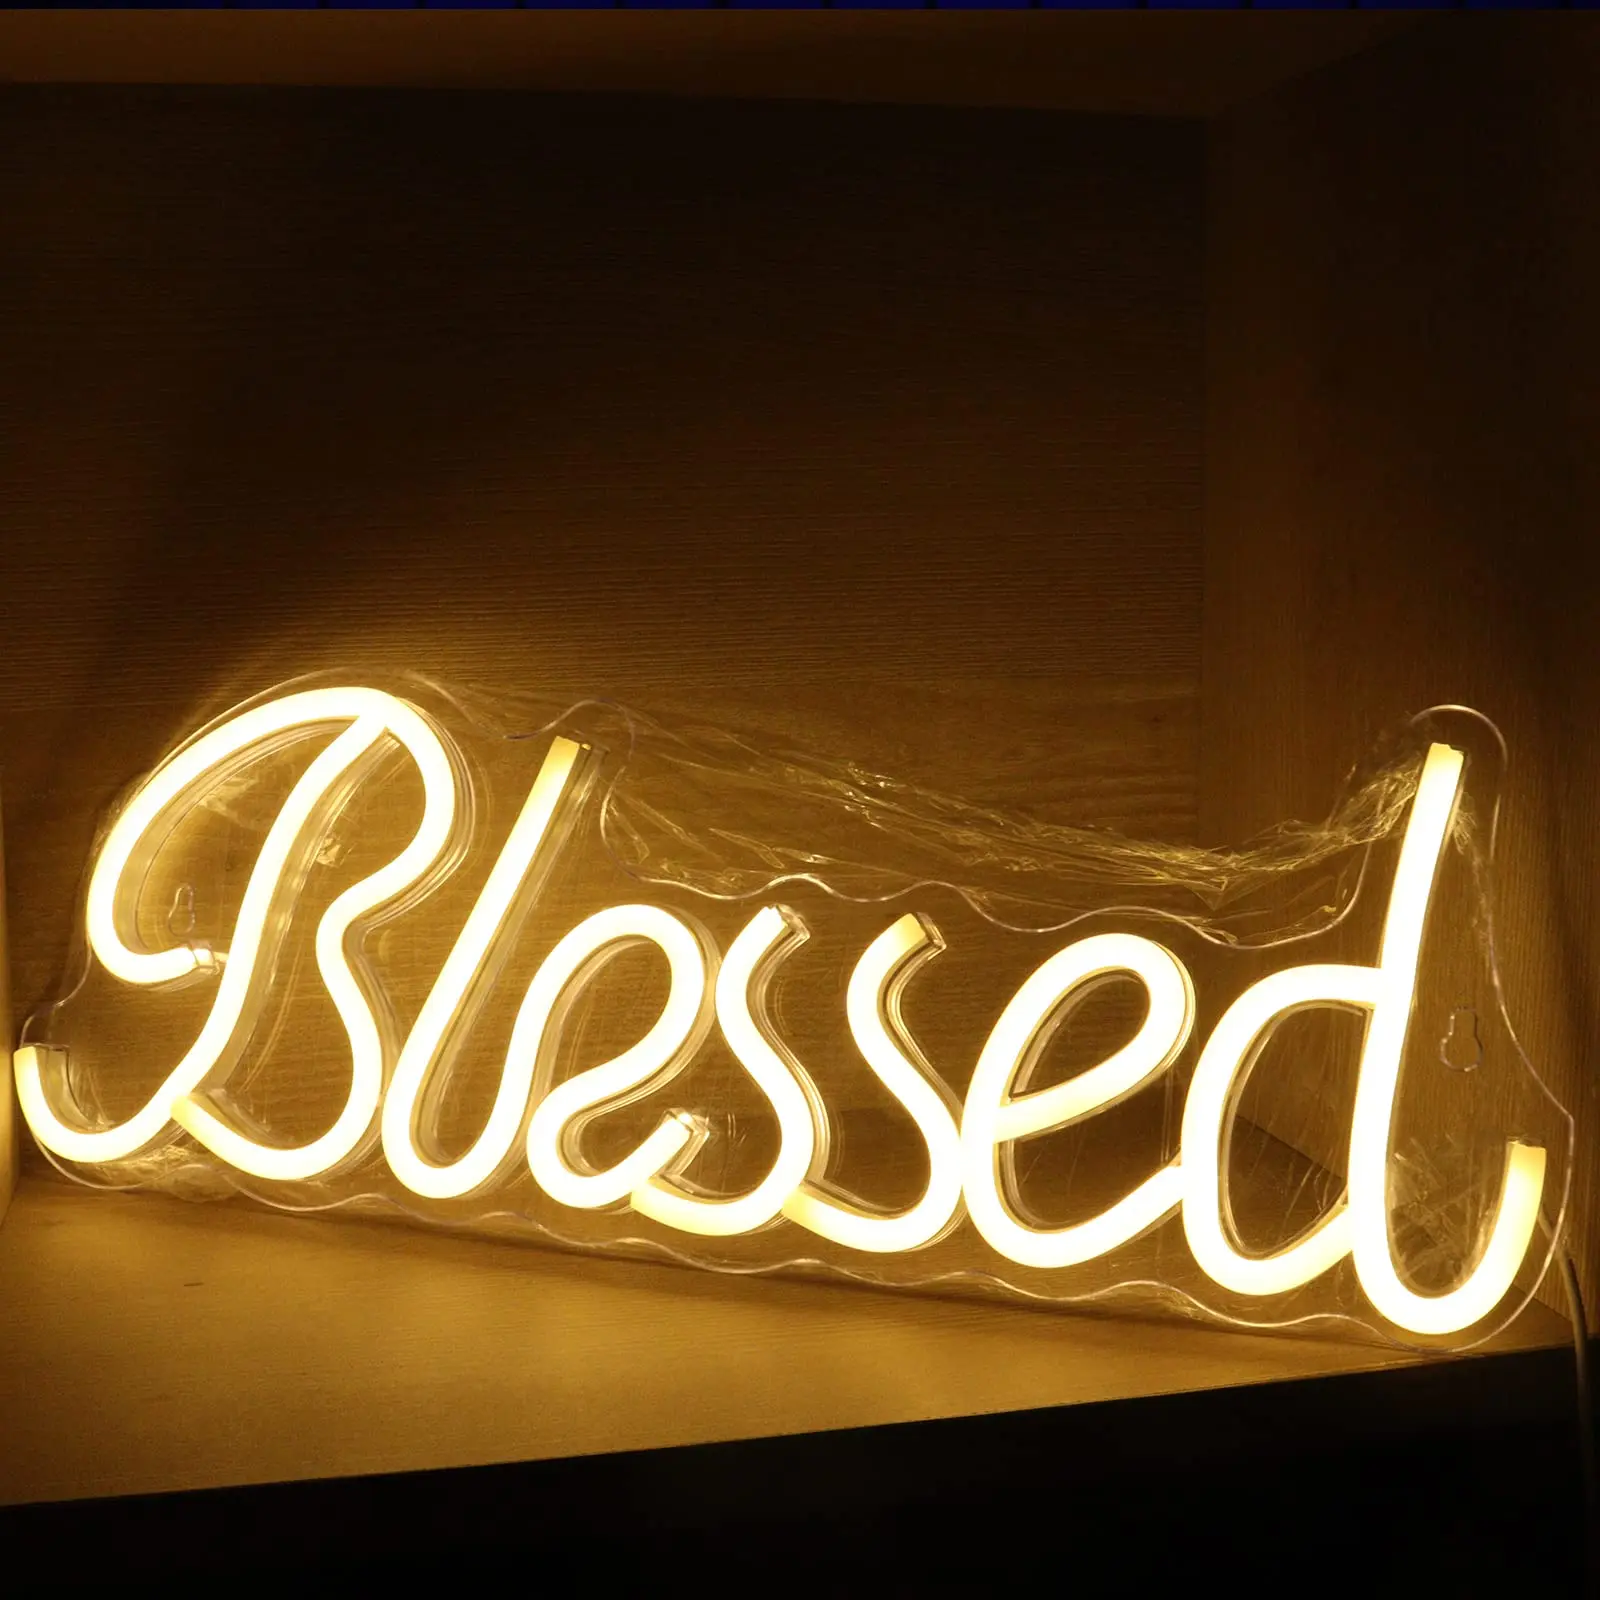 

Blessed Blue Neon Sign For Club USB Powered Light Christma Wedding Birthday Party Shop Edroom Wall Decorating Lamp